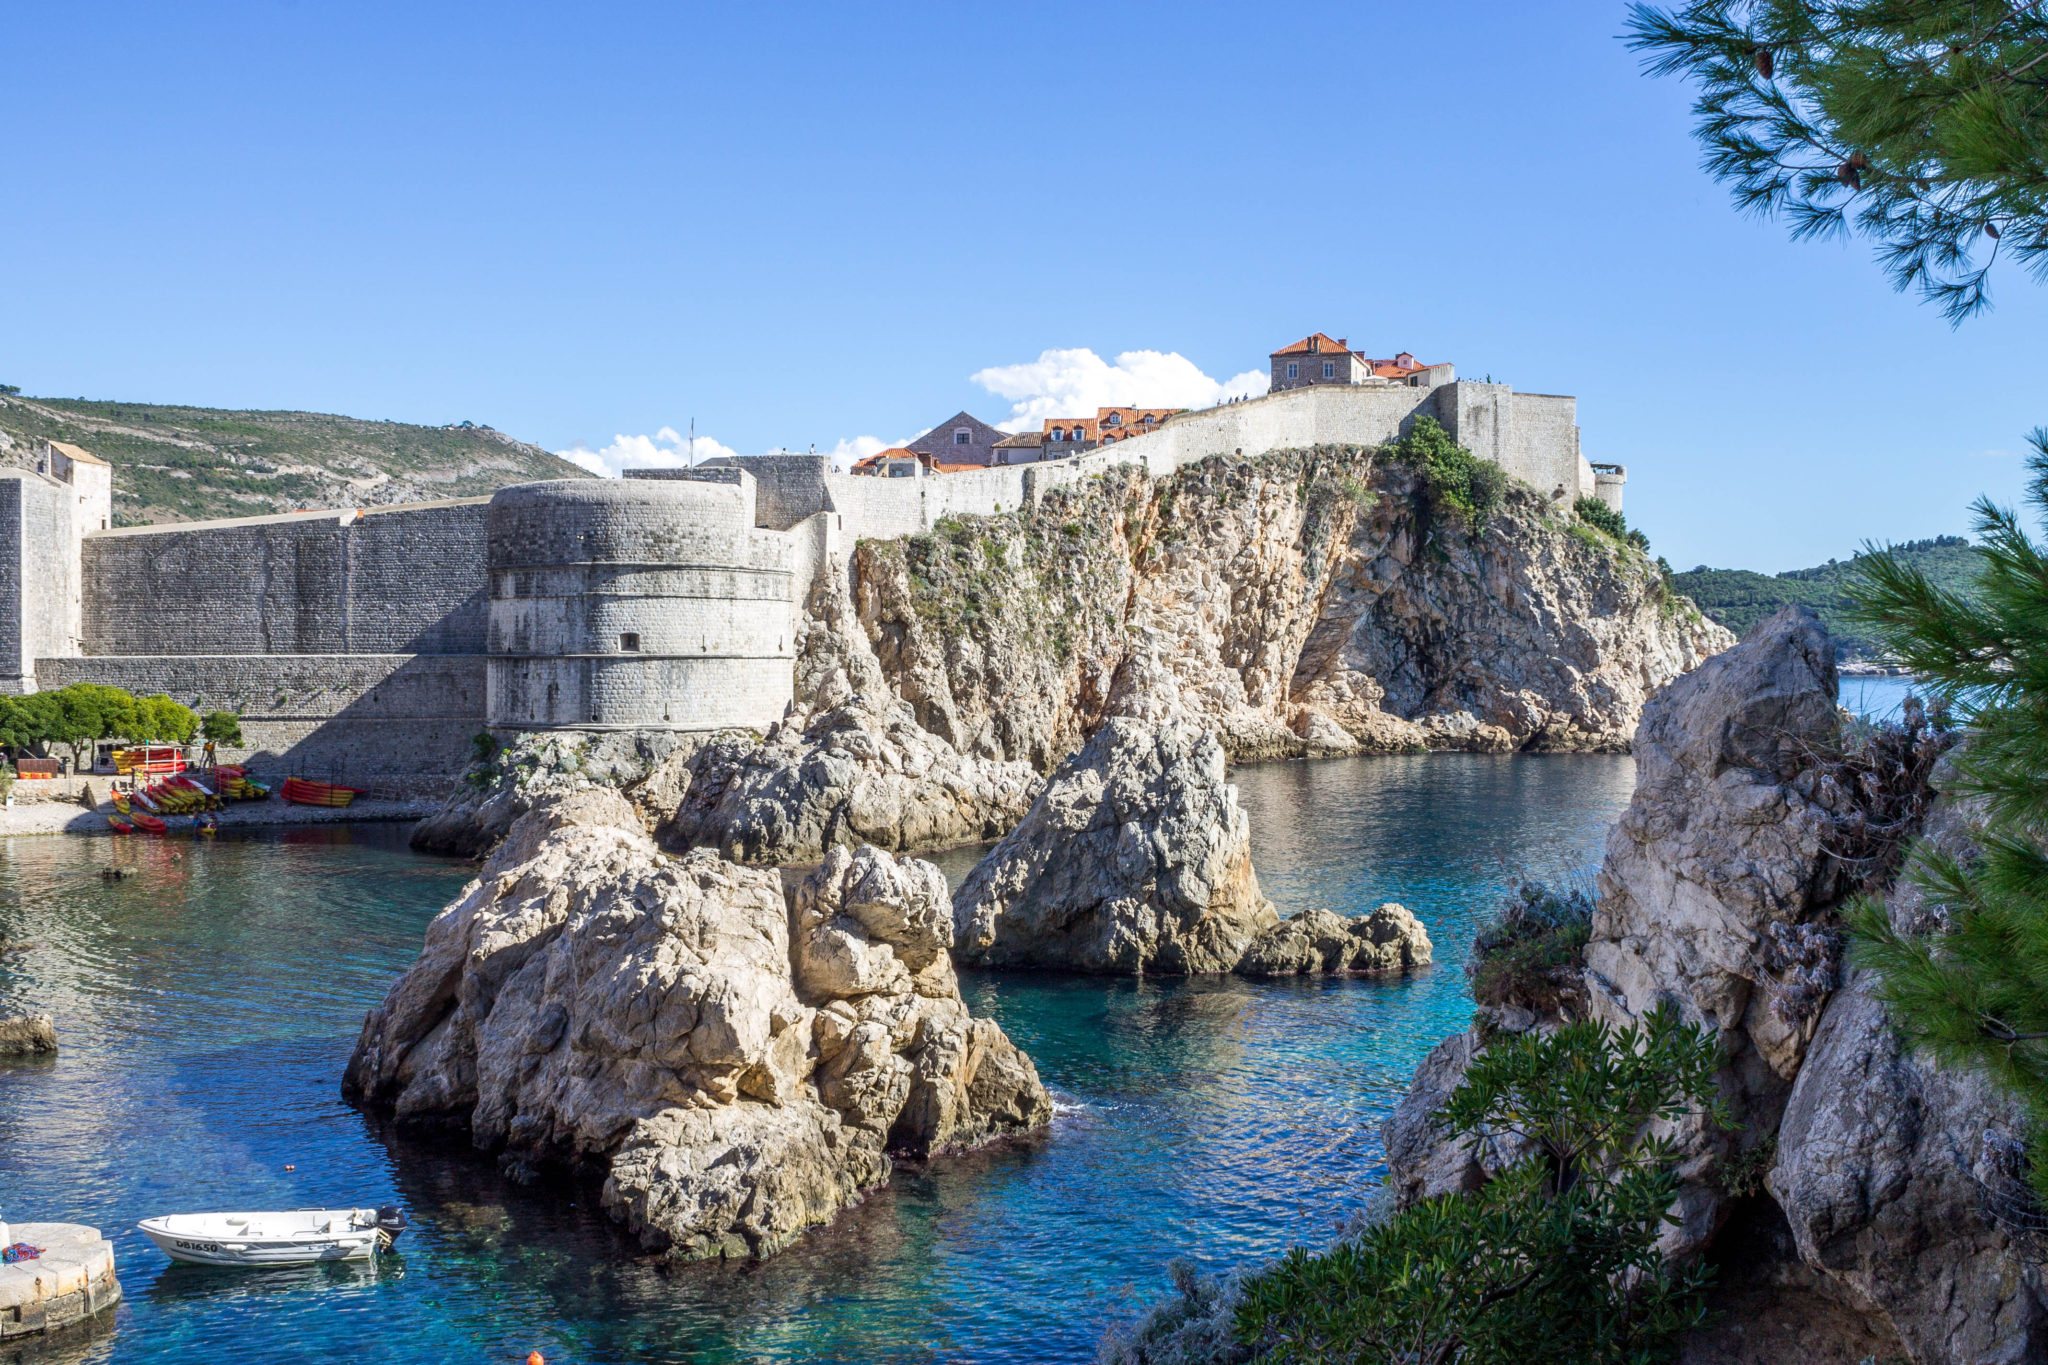 The walls of Dubrovnik from the new harbor